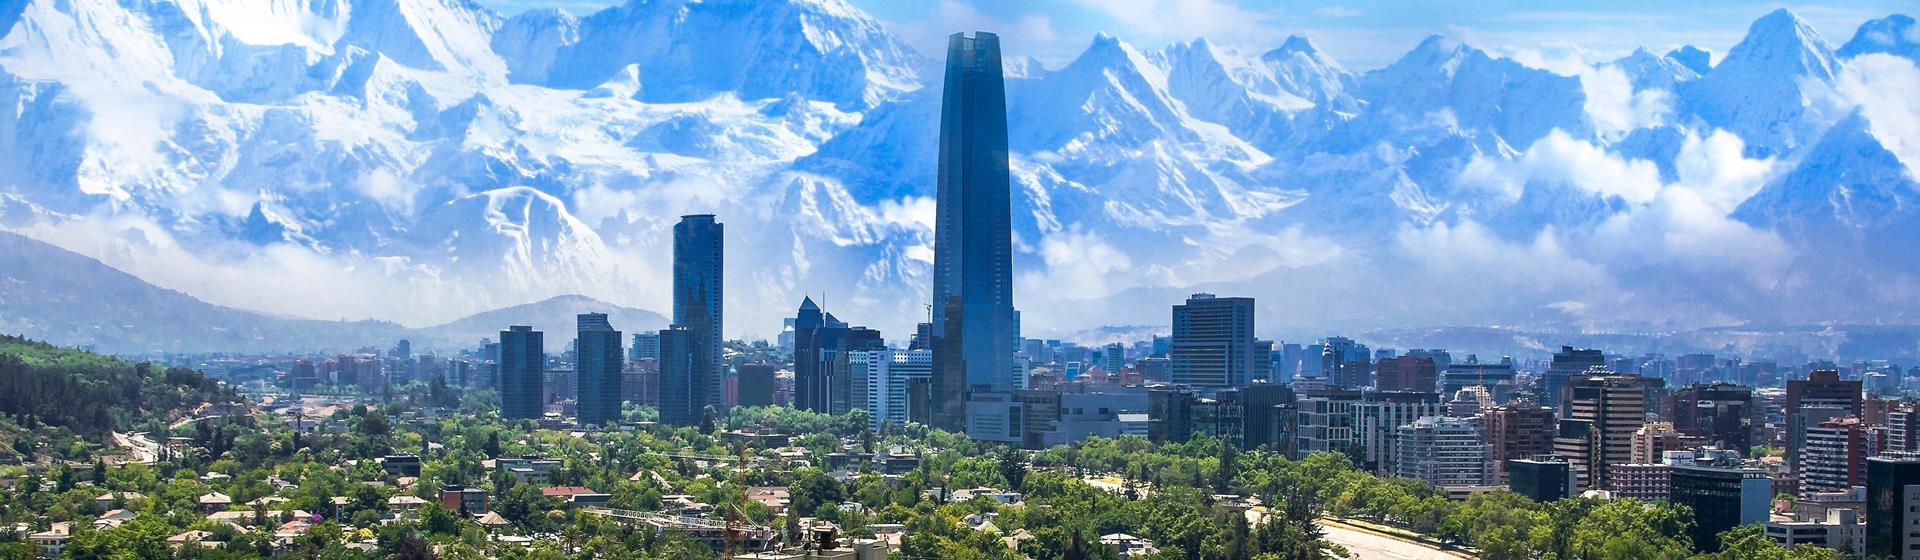 chile budget travel